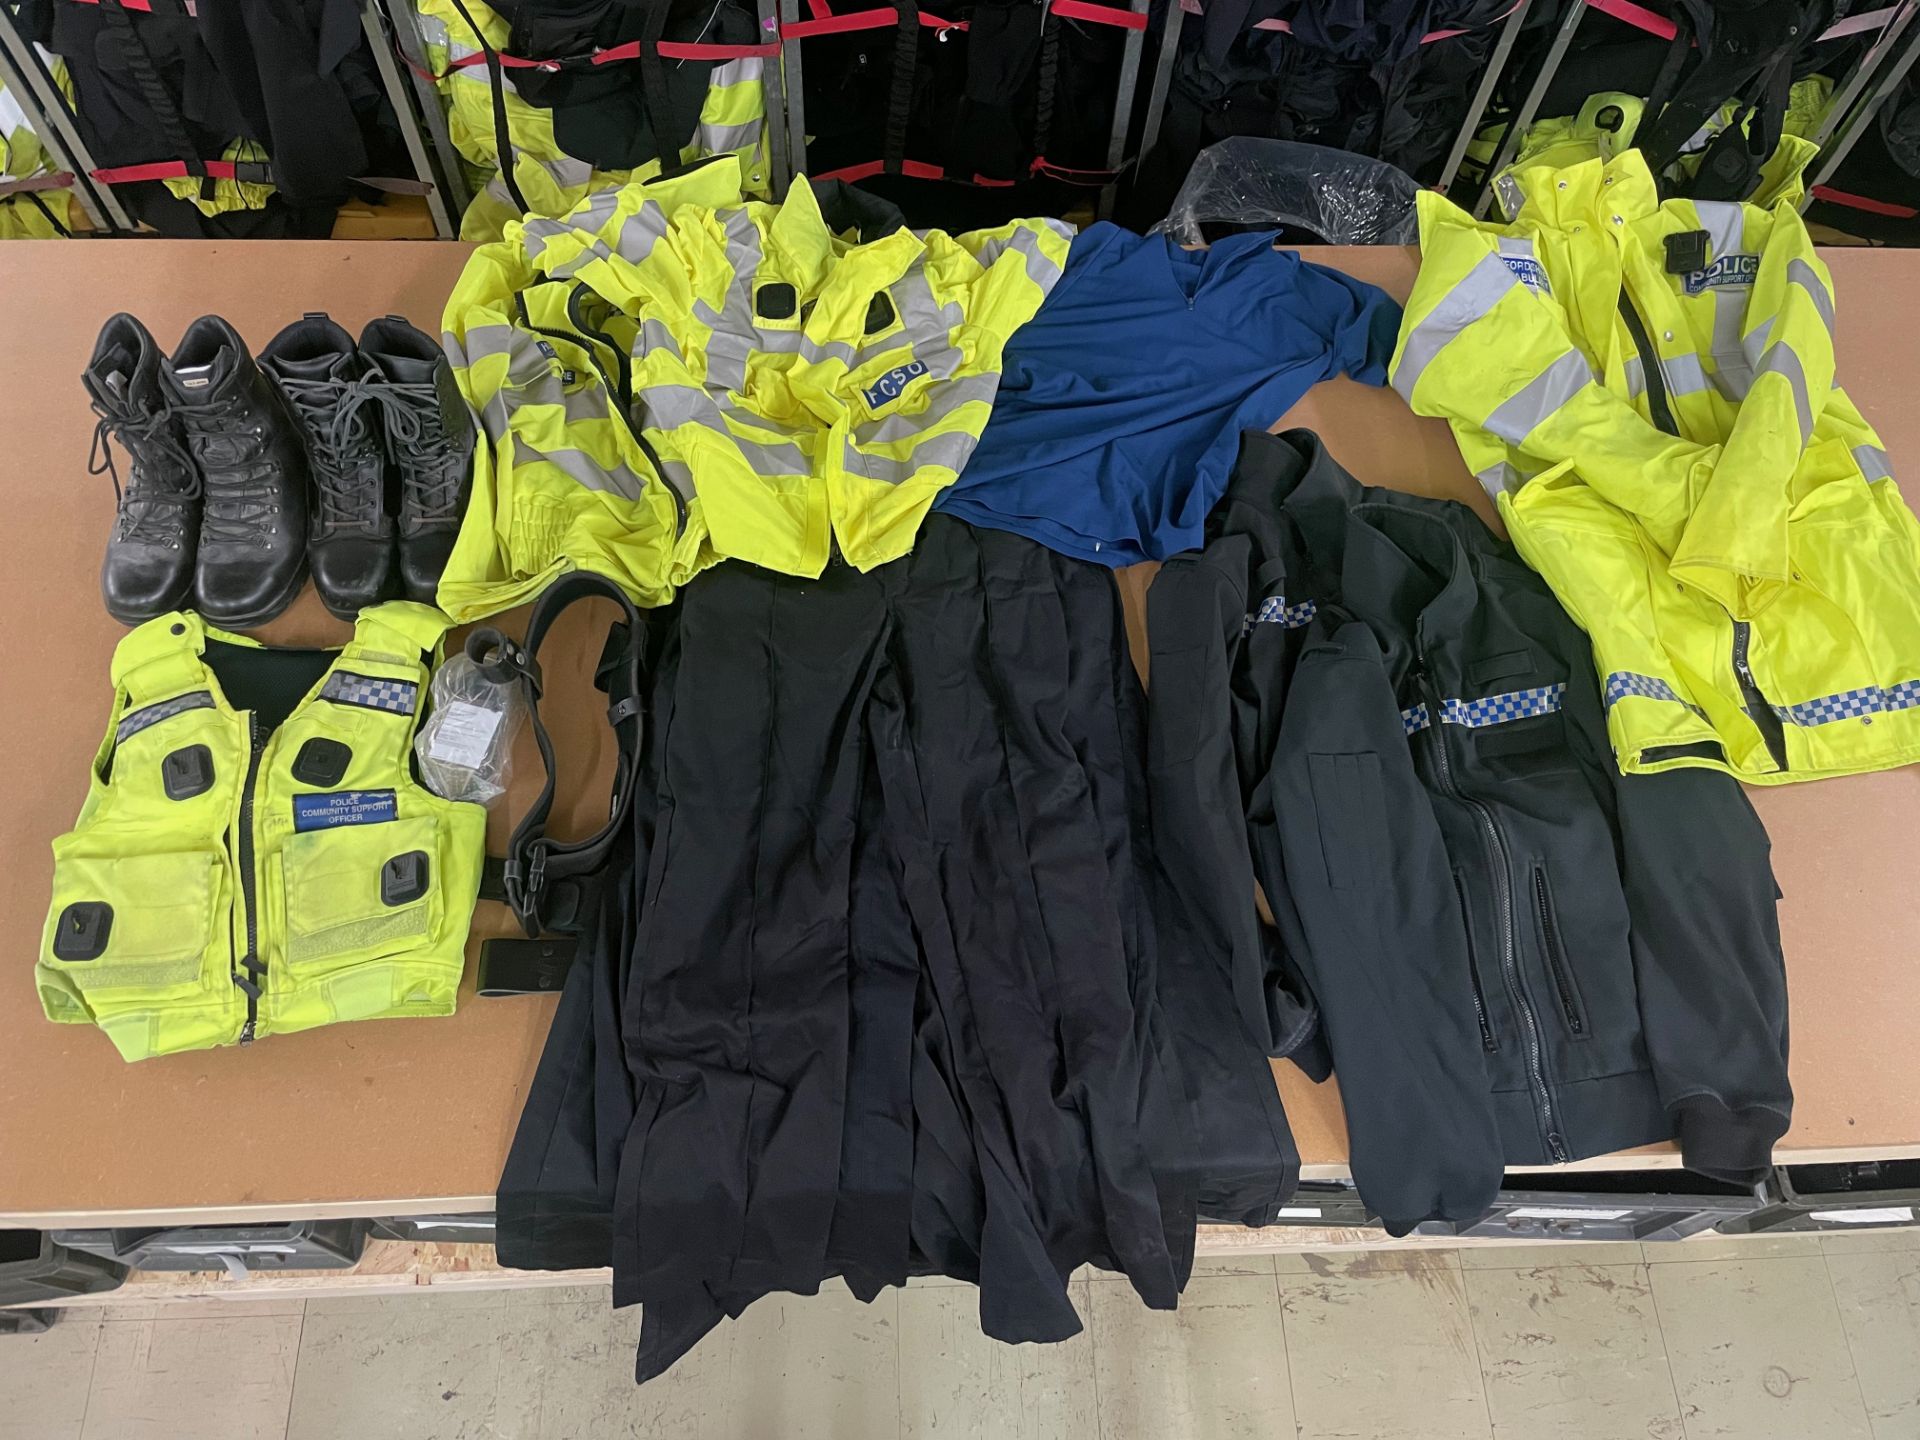 5 X BAGS EX POLICE CLOTHING & ACCESSORIES - RRP £1375.00 - Image 4 of 12